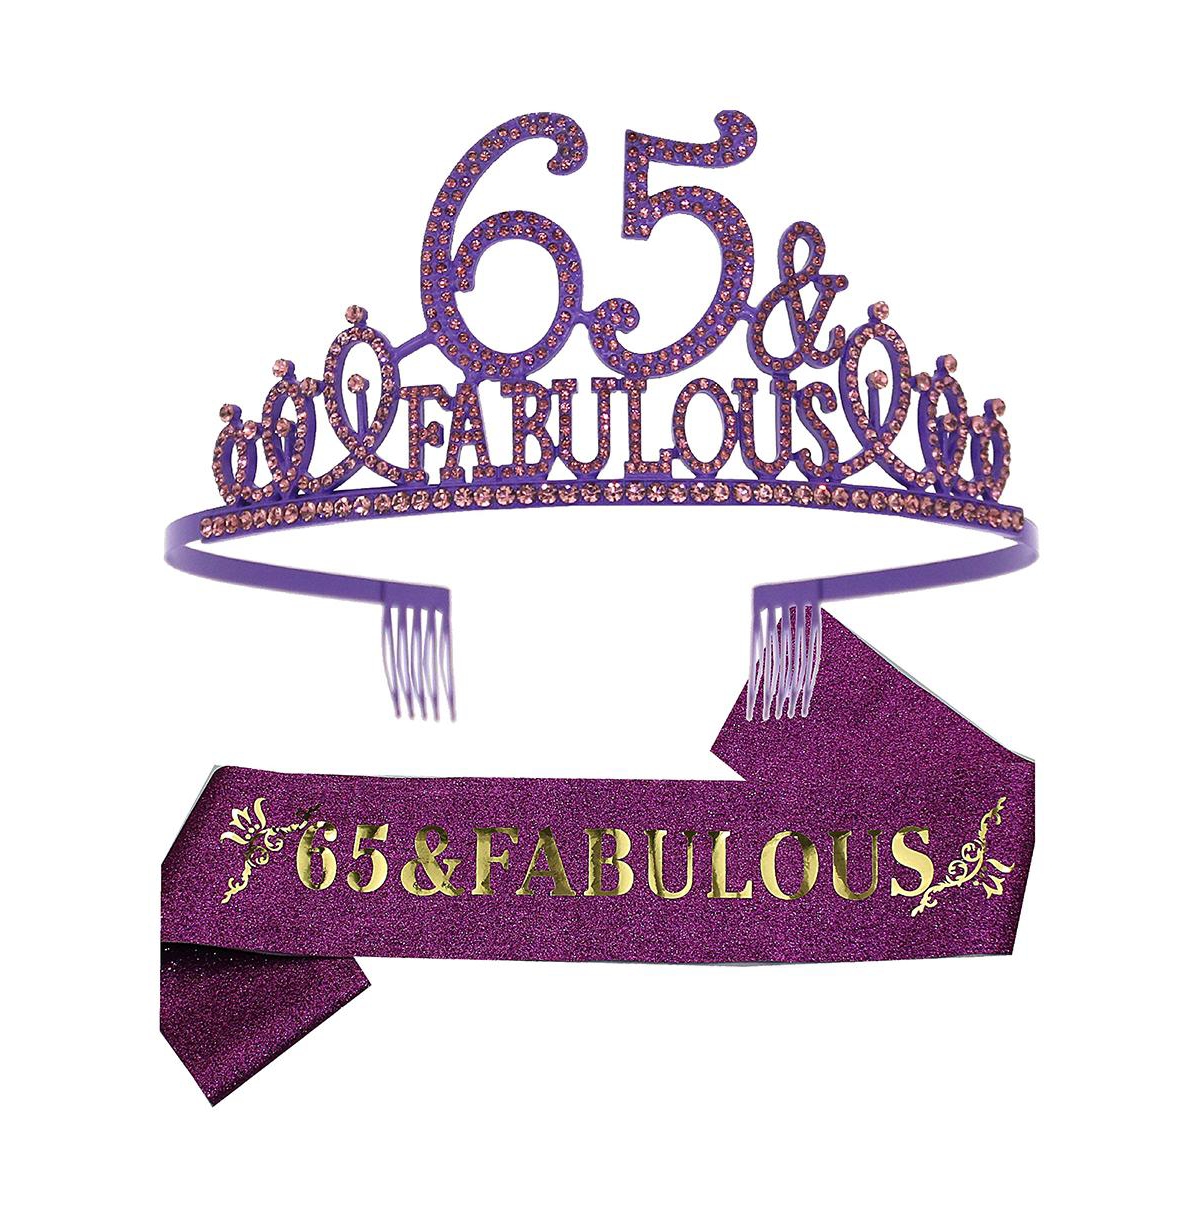 65th Birthday Sash and Tiara Set for Women - 65 and Fabulous Glitter Sash with Rhinestone Golden Tiara - Perfect for Celebration Decorations and Acces